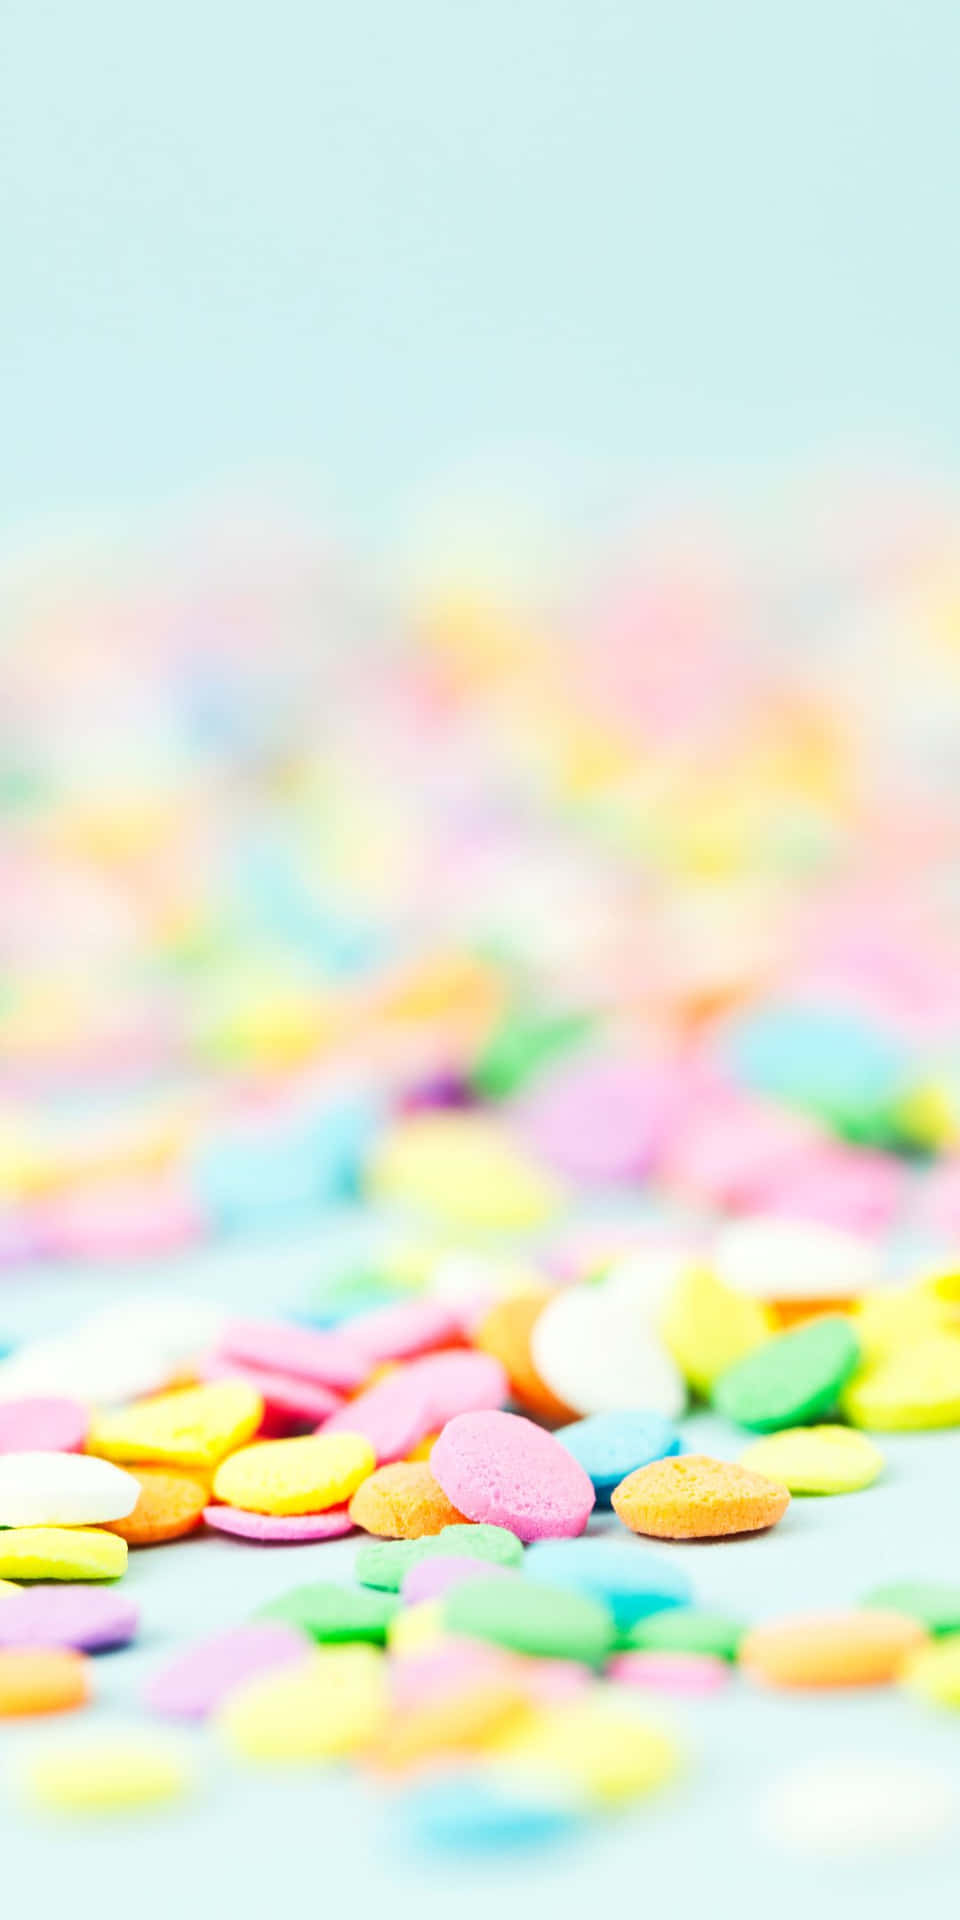 Blurred Round Shaped Sprinkles Background